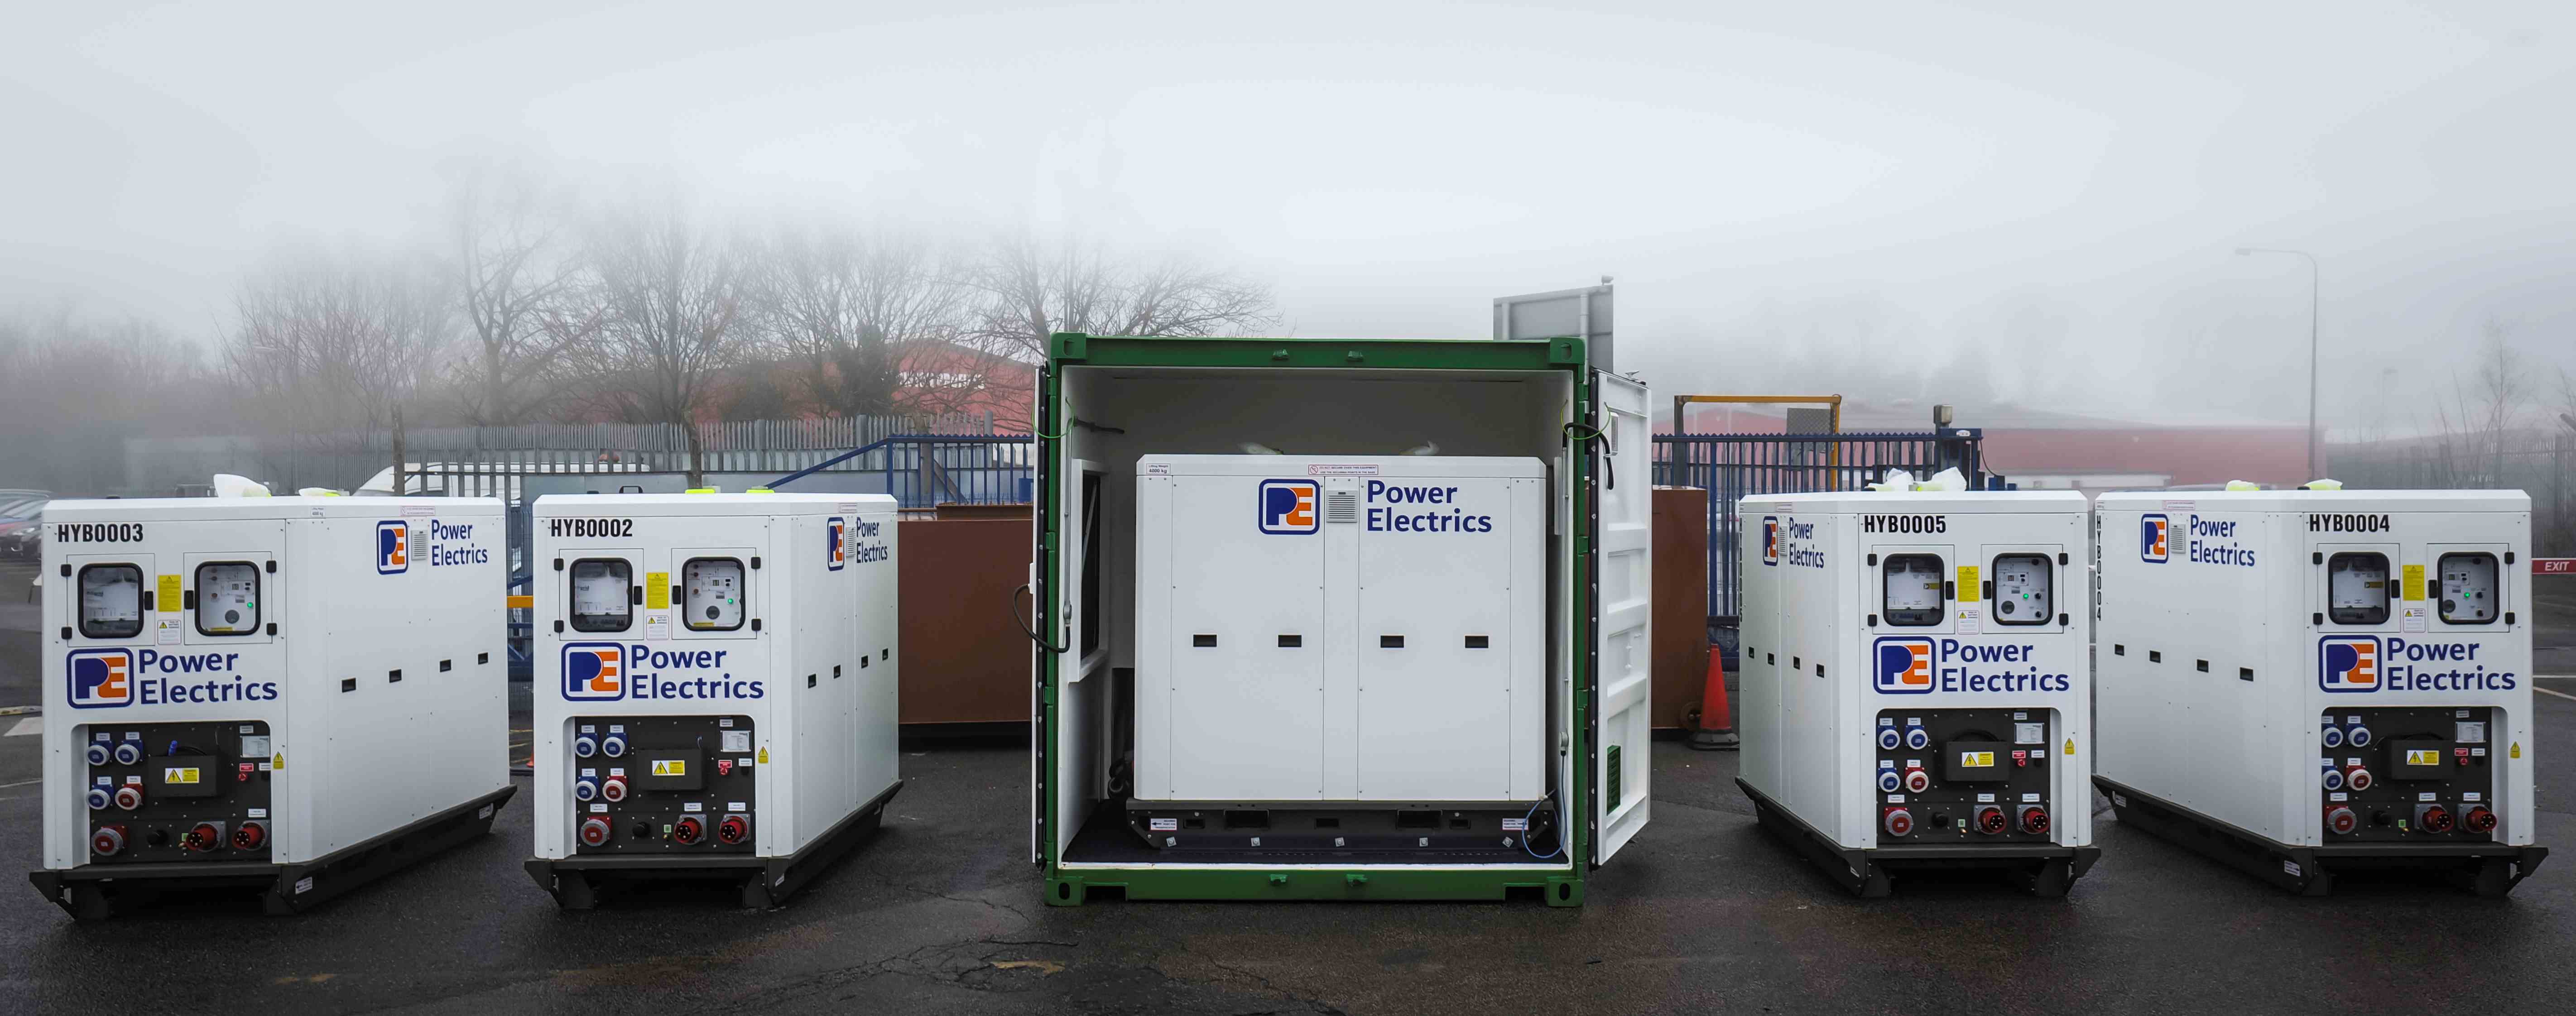 Five hybrid battery units in a line 